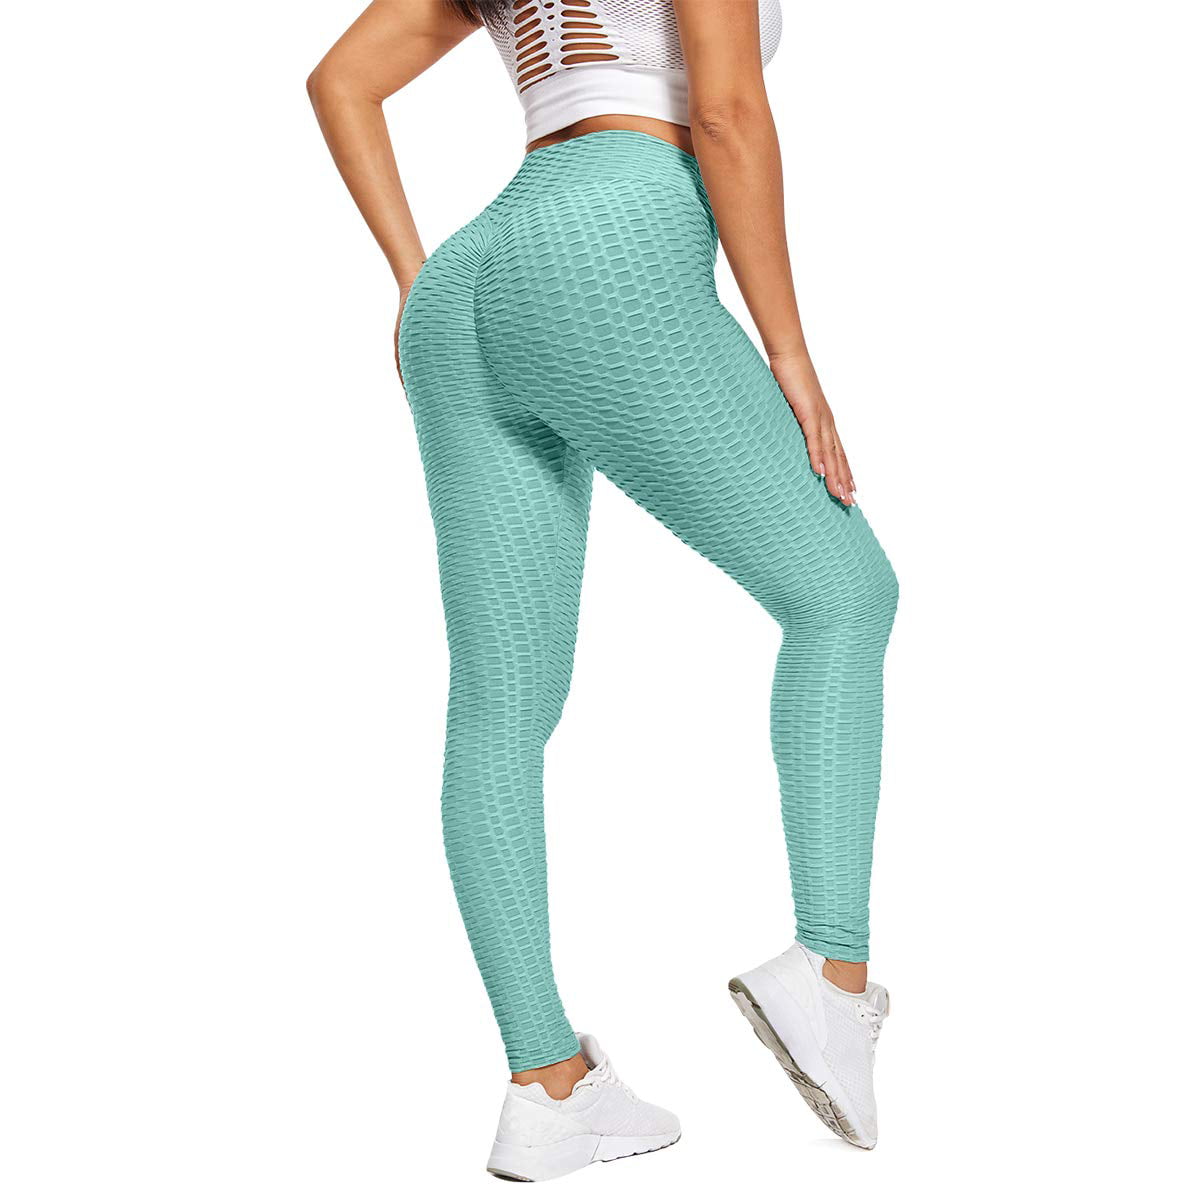 Details about   Womens Anti-Cellulite Textured Yoga Pants Scrunch Butt Leggings Workout Trousers 